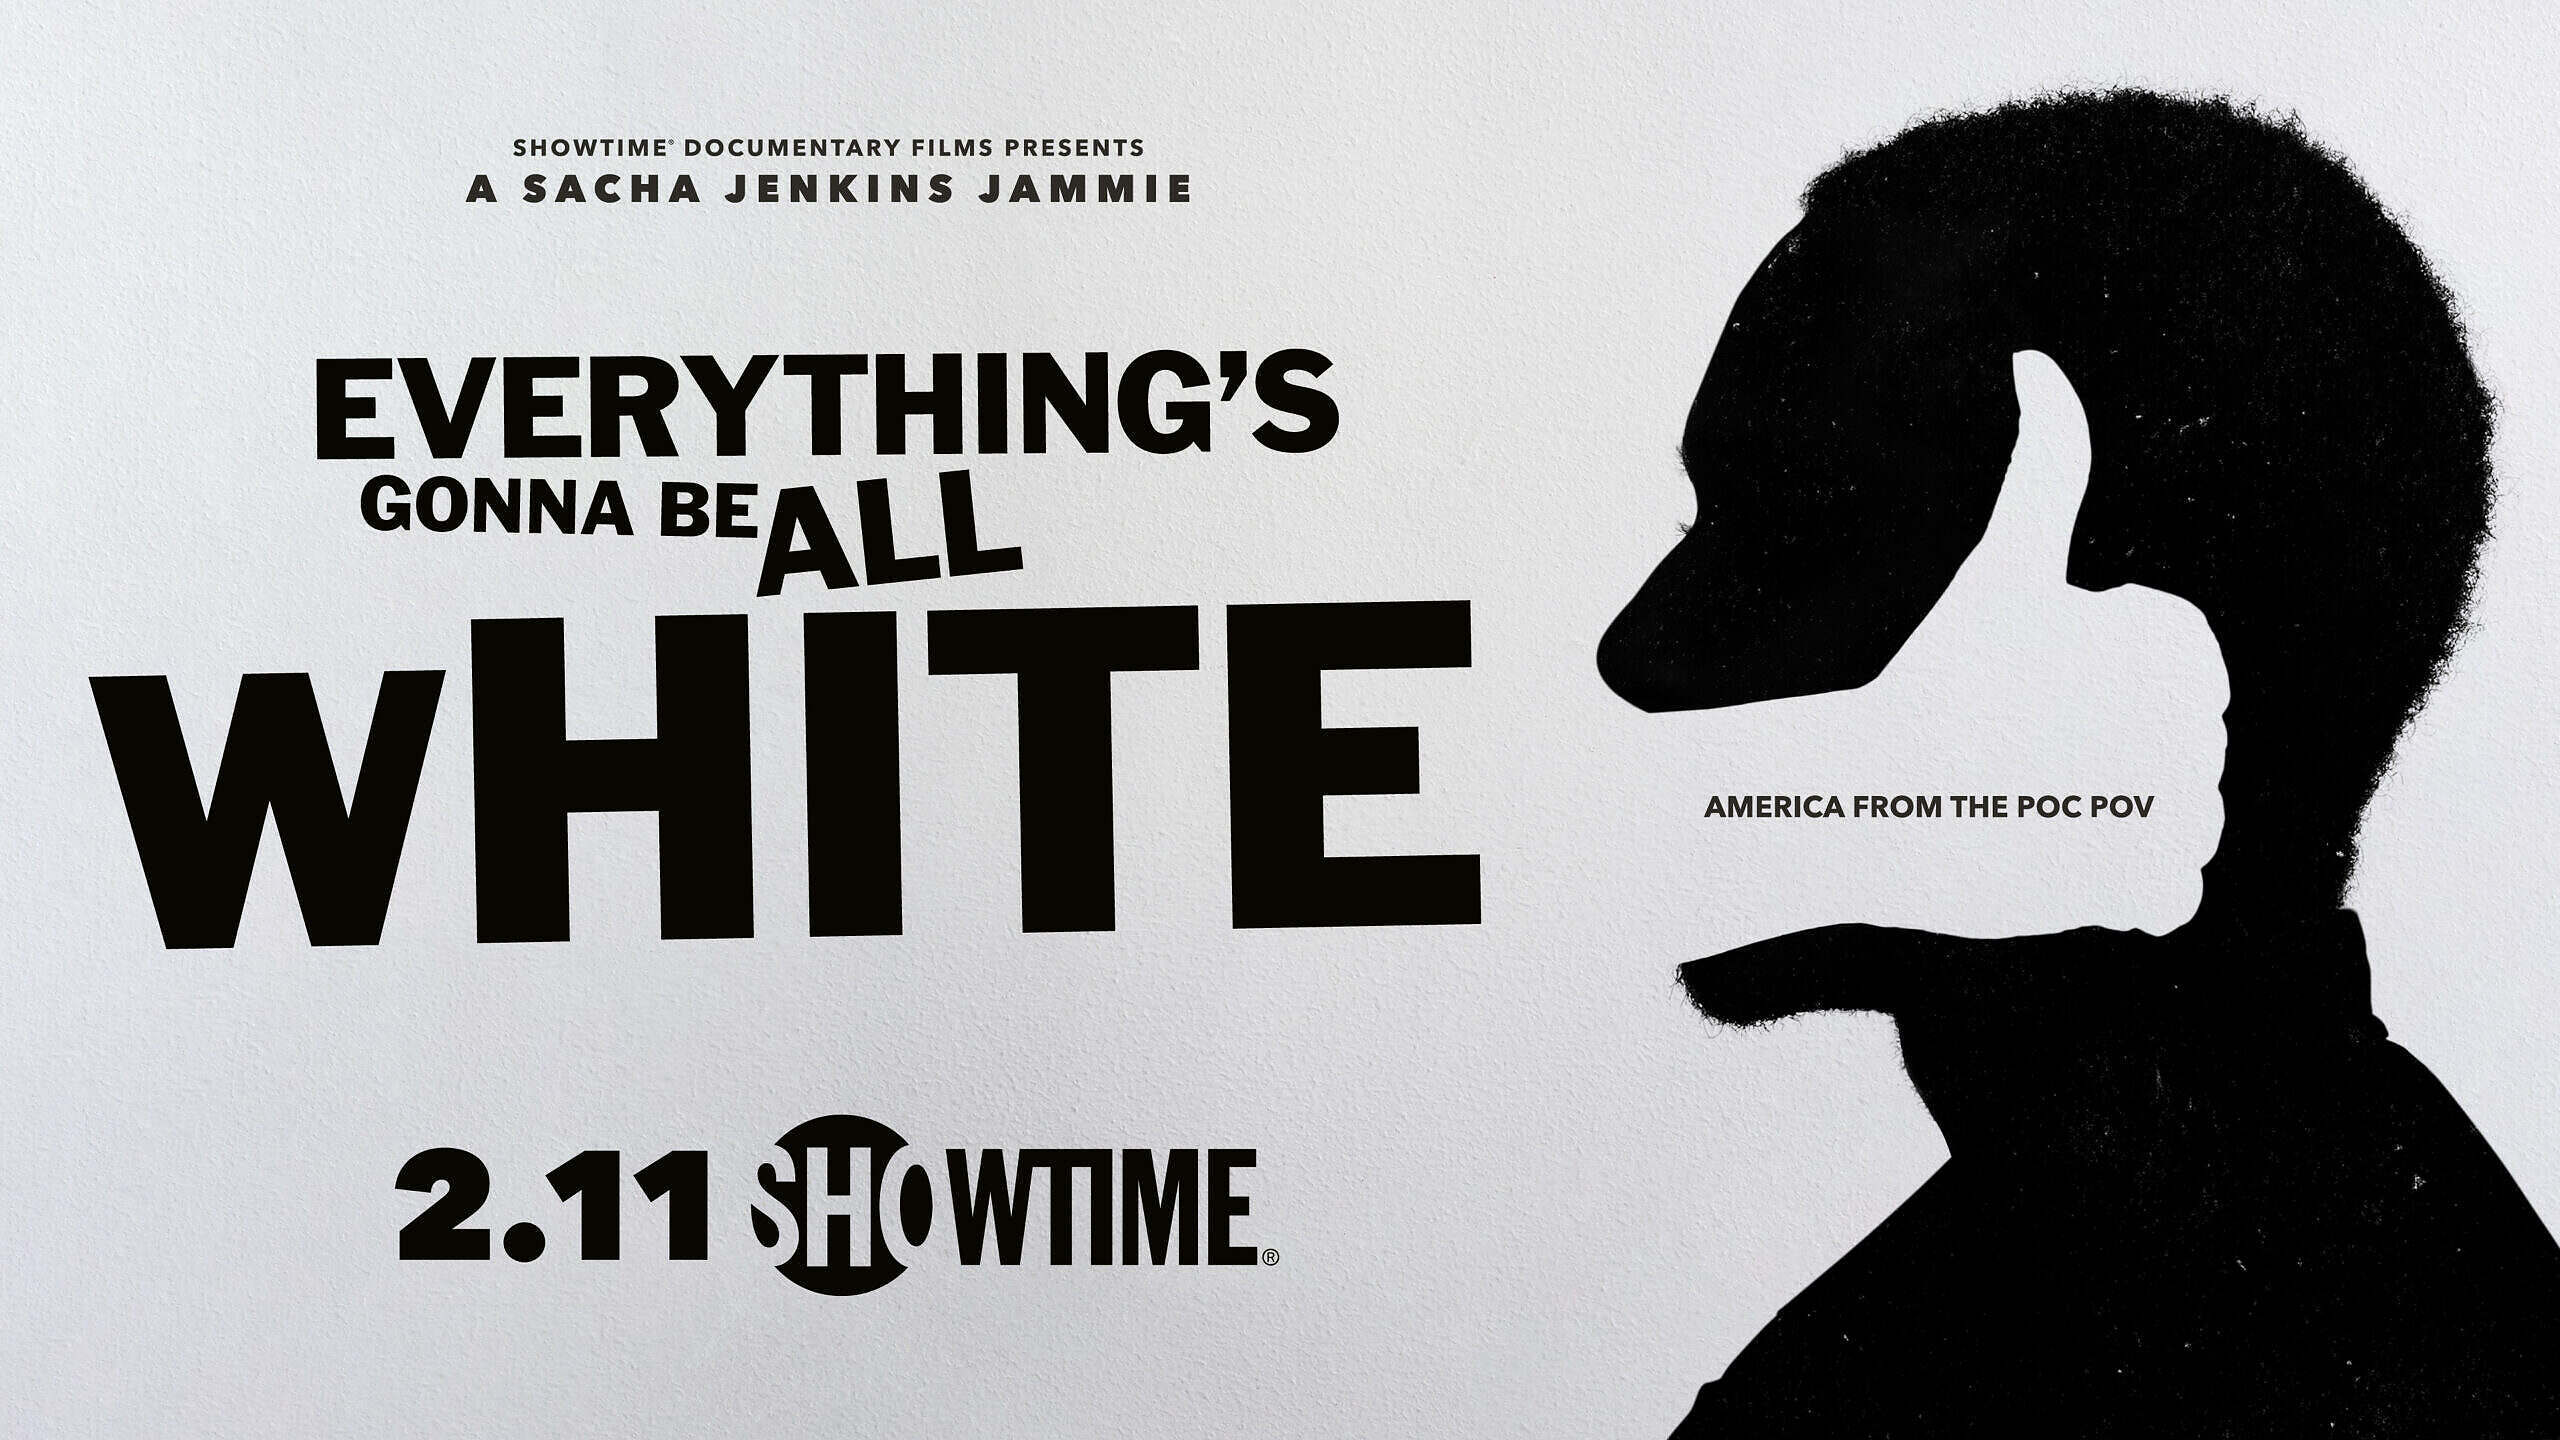 1st Trailer For Showtime Original Movie 'everything’s gonna be all white'